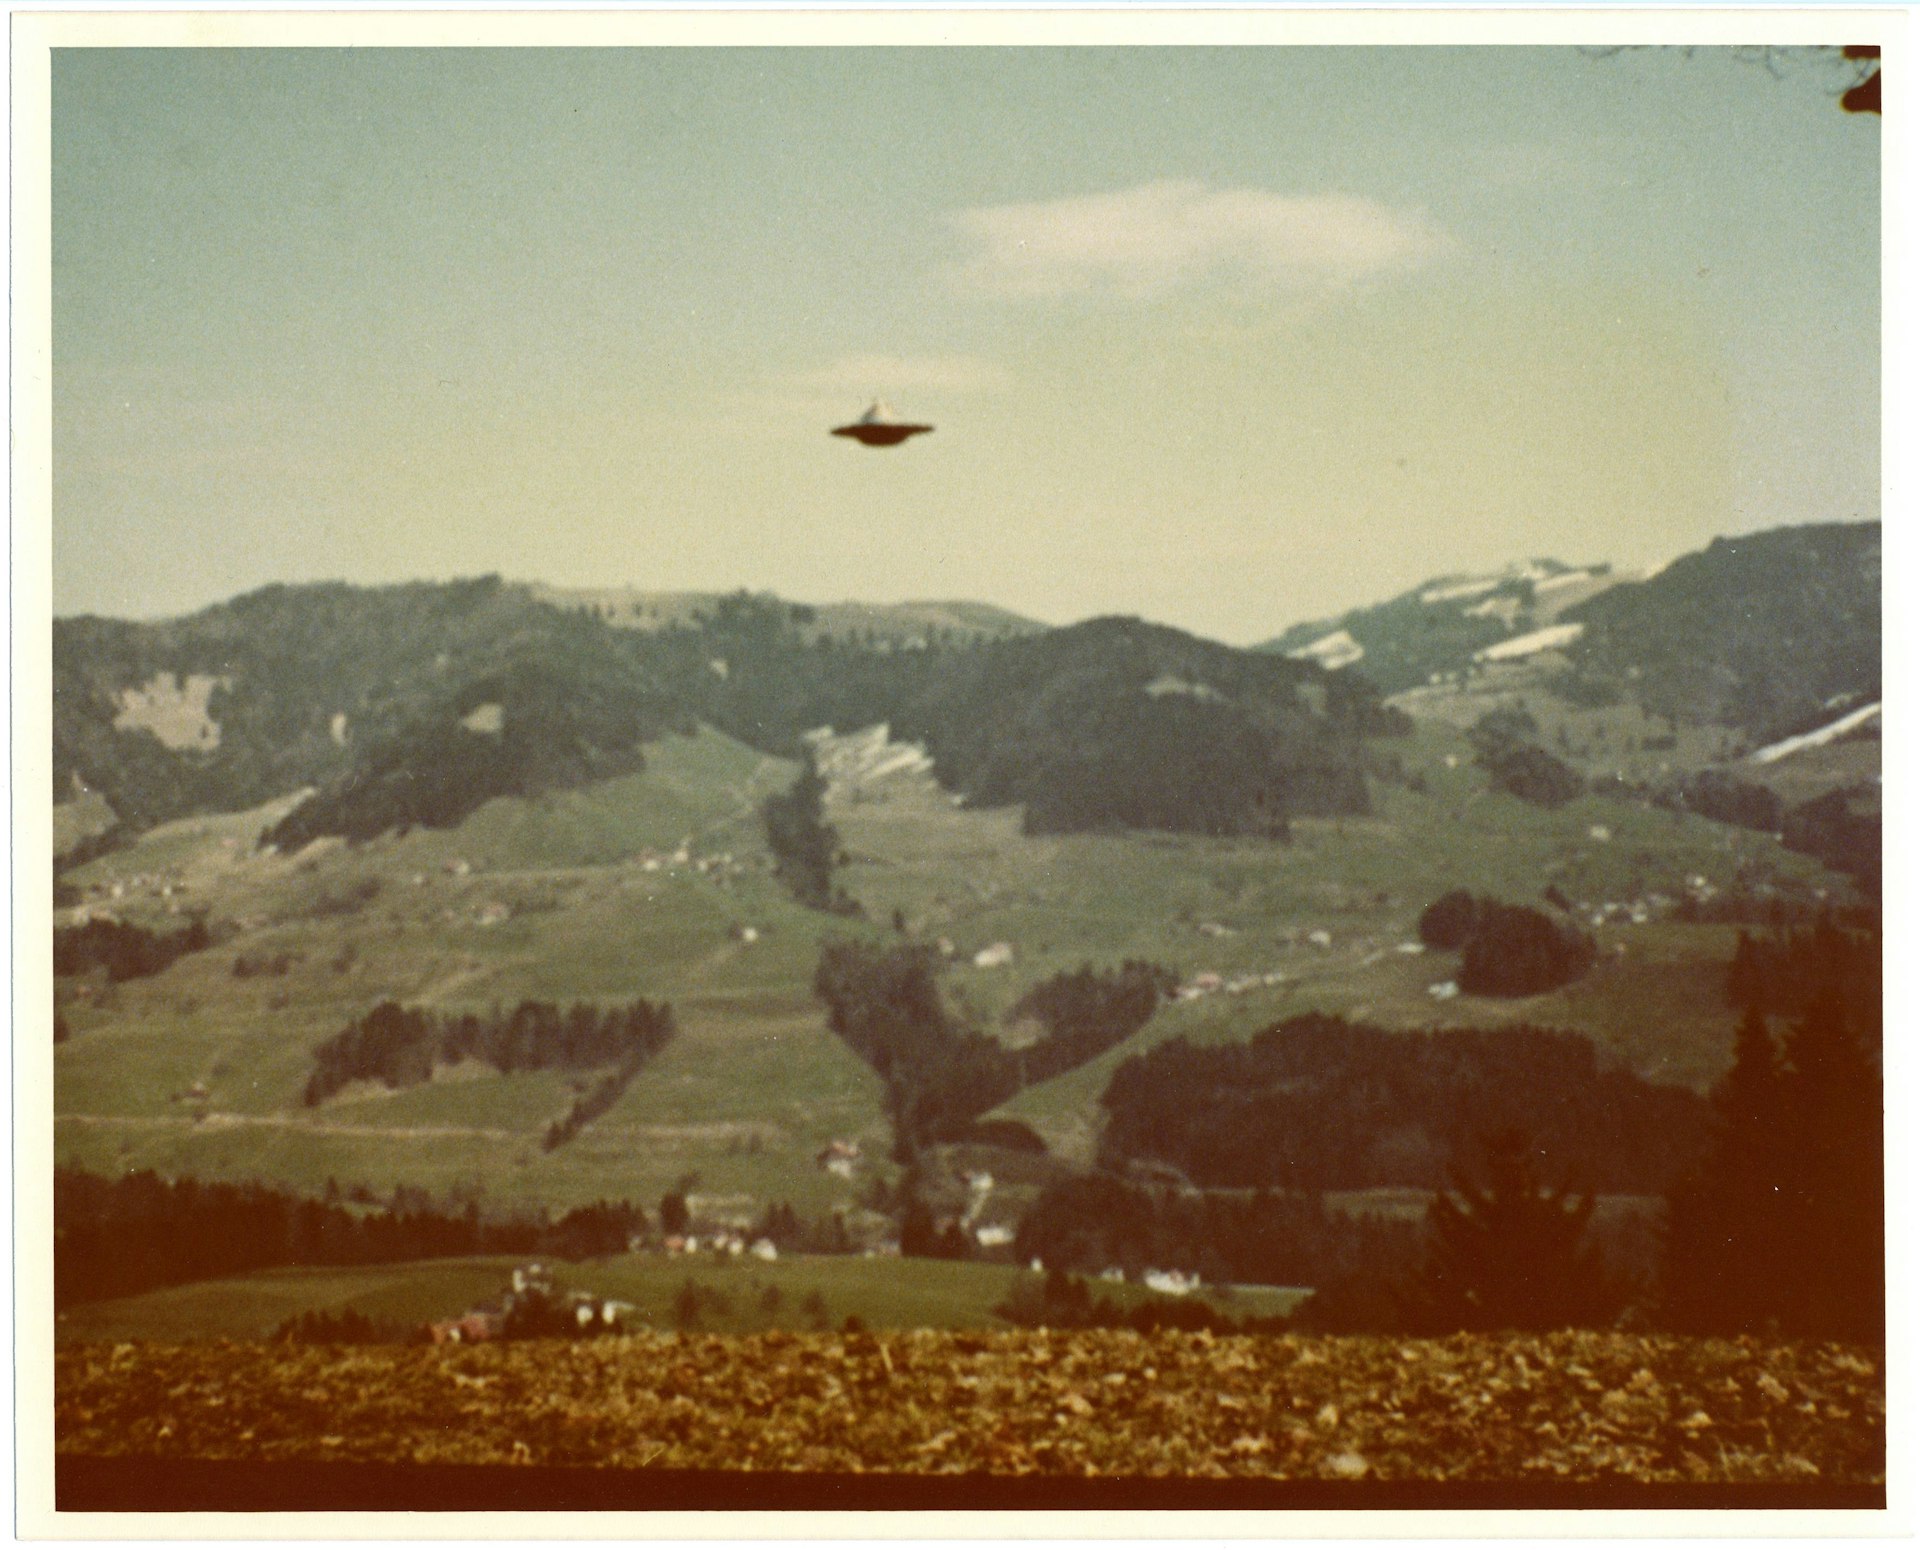 Photograph by Billy Meier From the UFO Photo Archives of Wendelle Stevens Collection of Gordon MacDonald